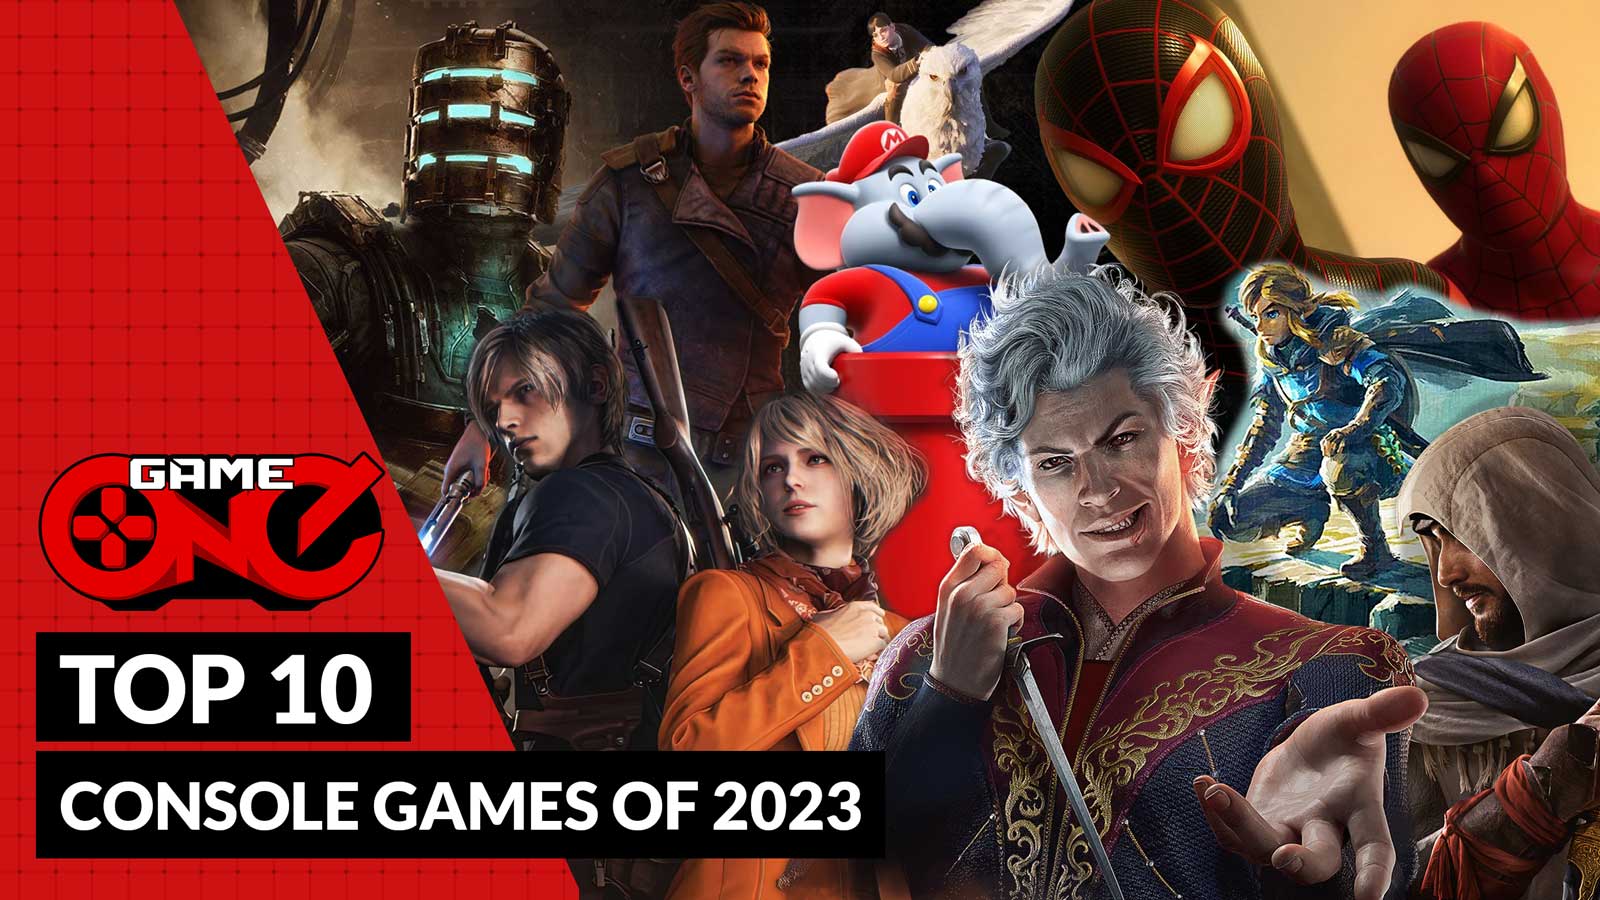 Top 10 Console Games of 2023